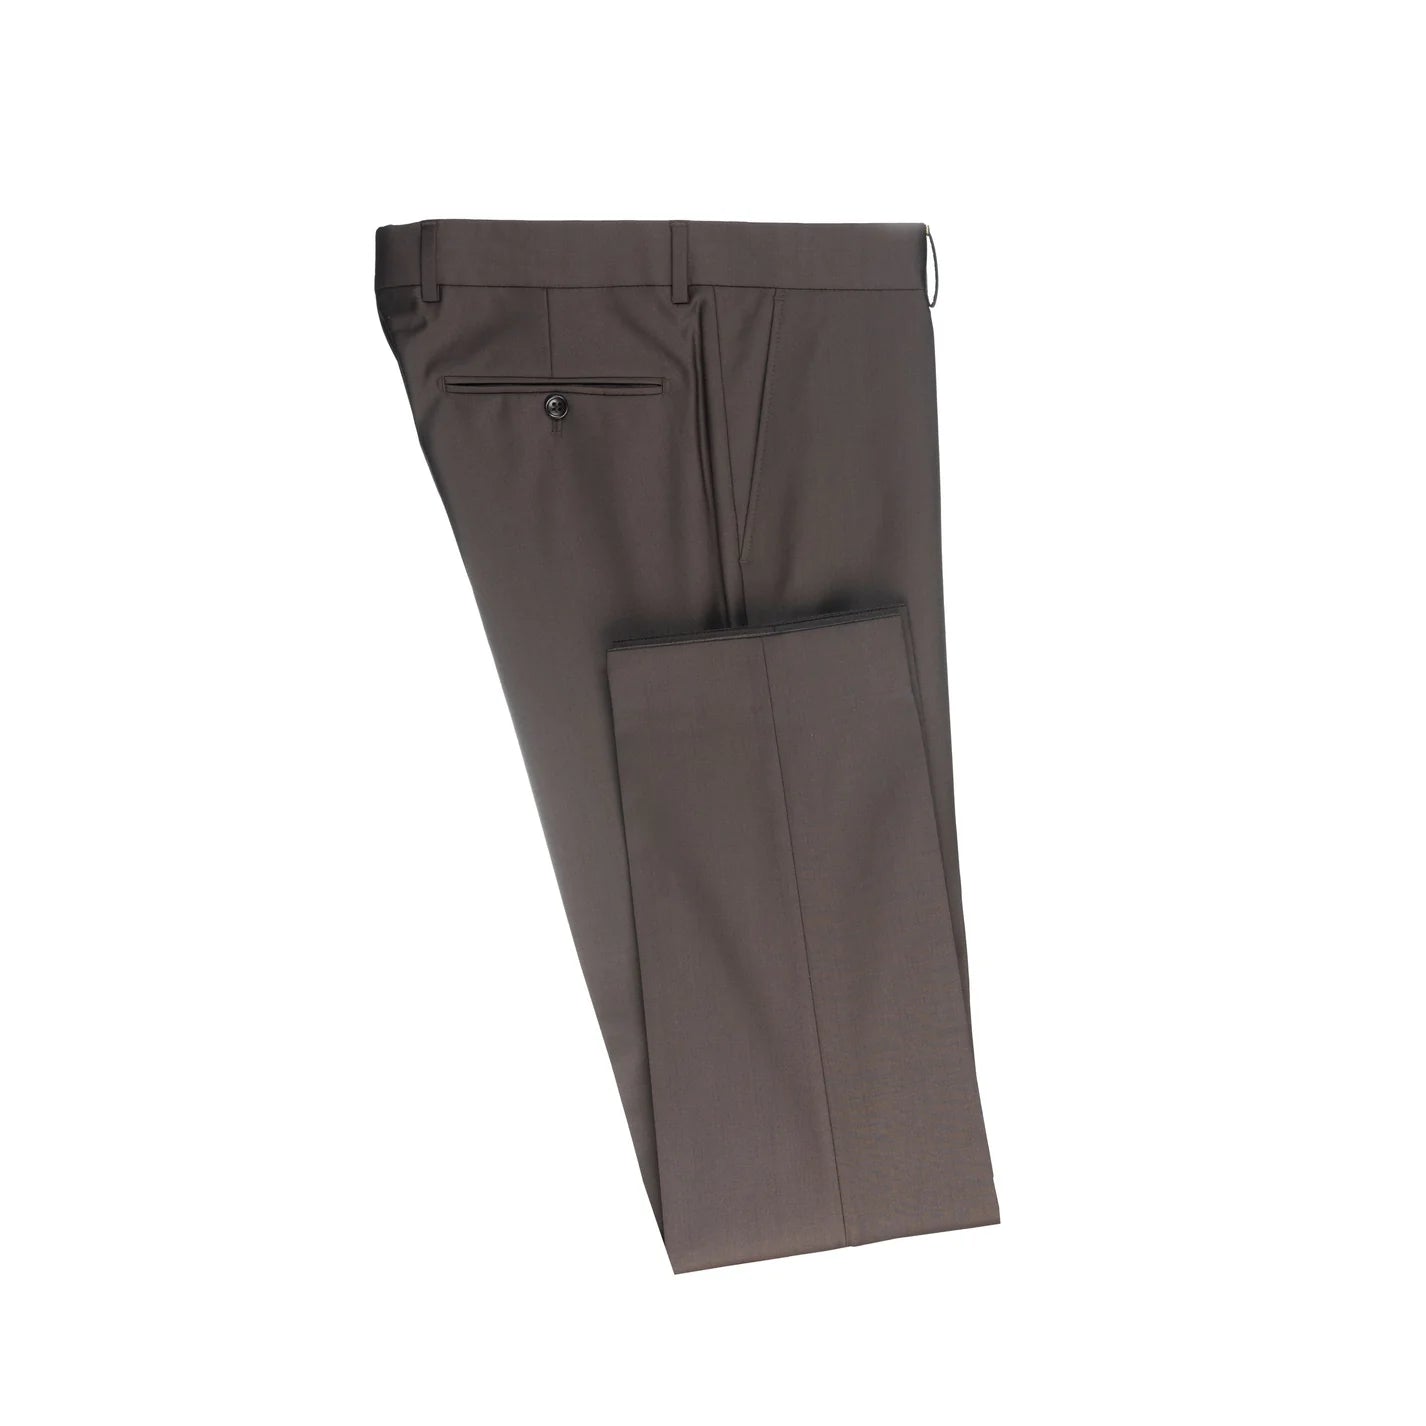 Men's Bagozza Sirio Trousers with Piped back pocket & Slit front pockets in brown (3219) - available in-store, 337 Monty Naicker Street, Durban CBD oar online at Omar's Tailors & Outfitters online store.   A men's fashion curation for South African men - established in 1911.